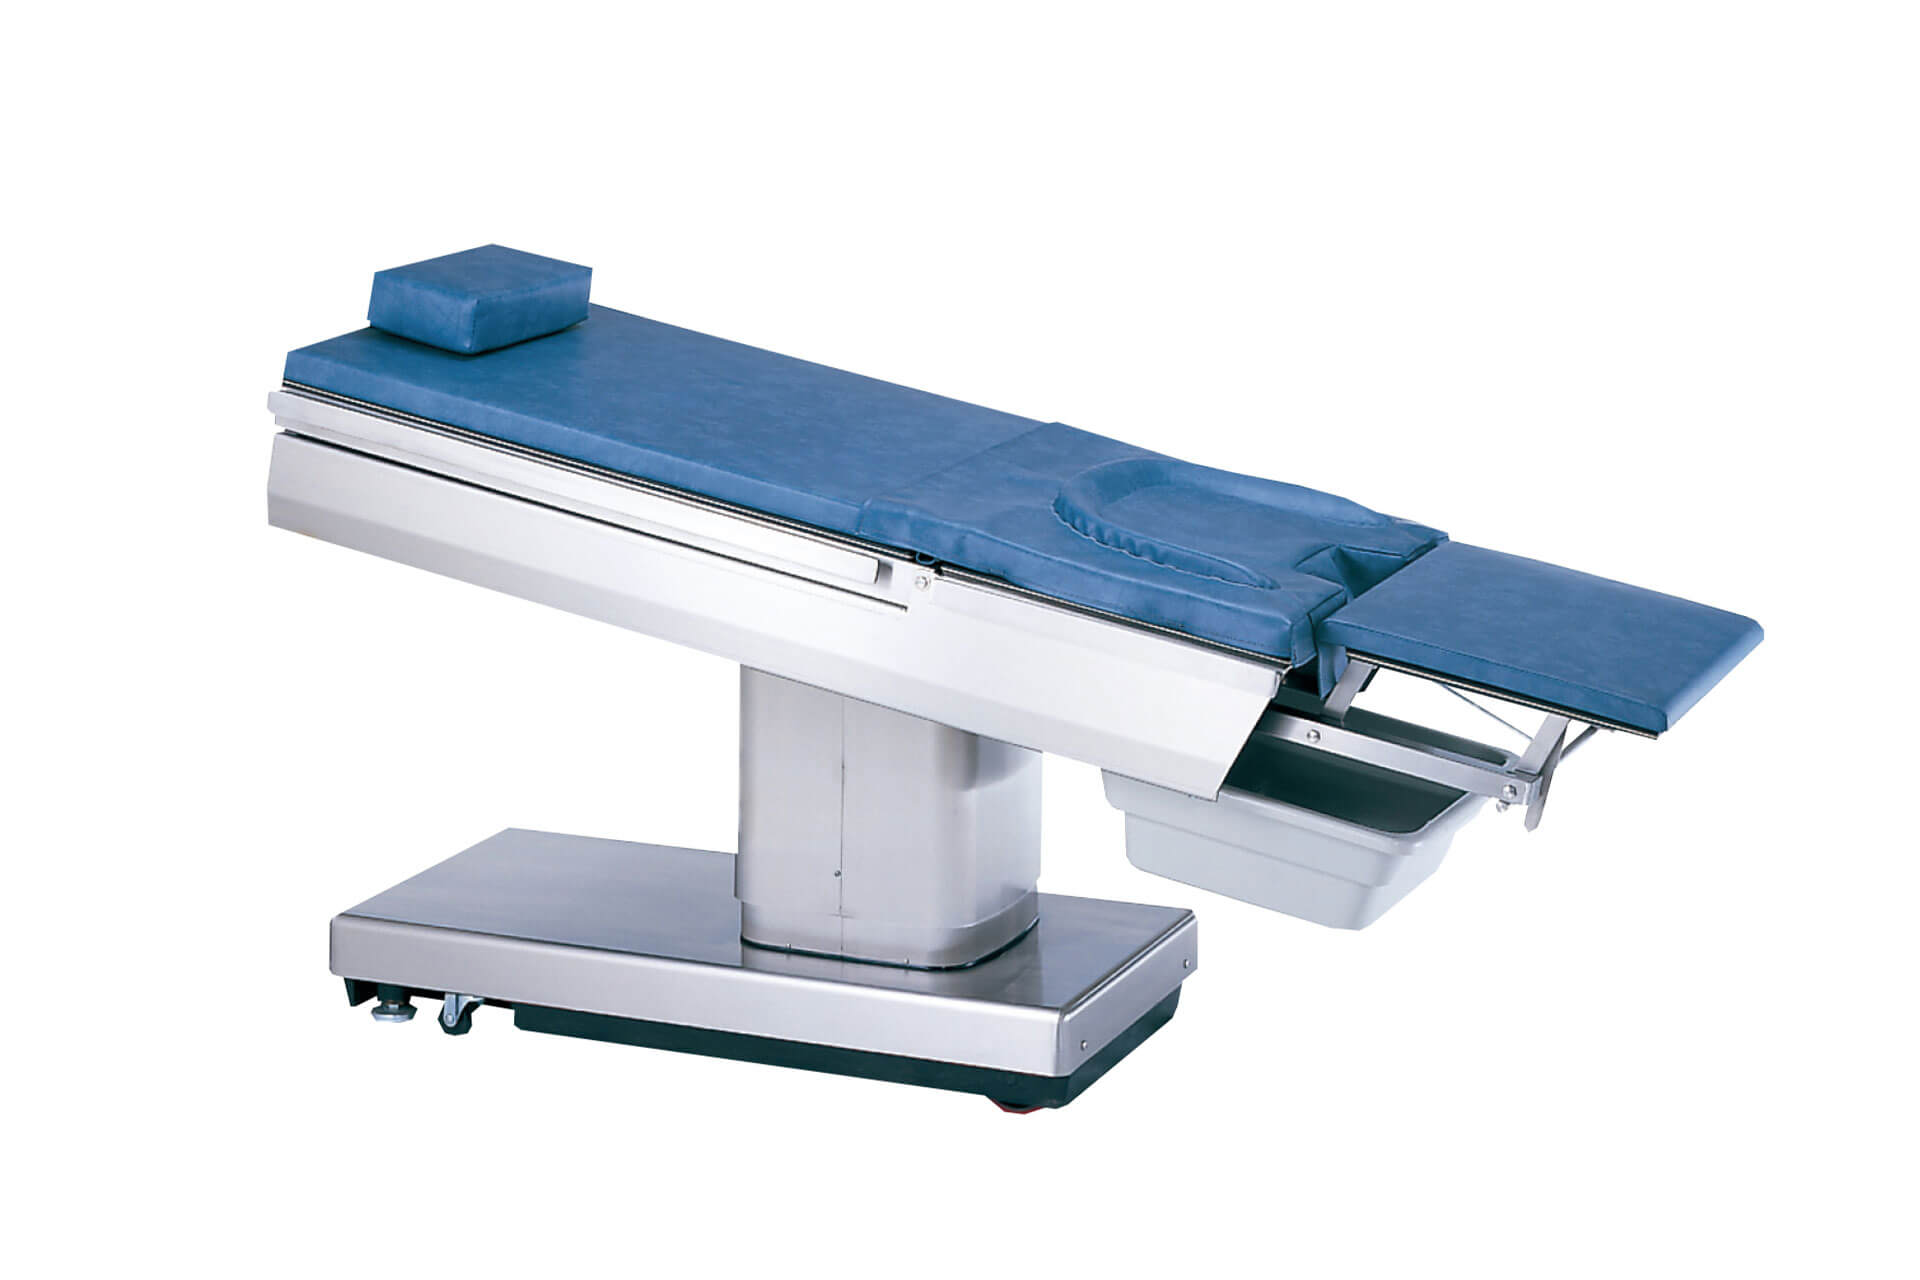 SG-680 - Operating Table- Sturdy